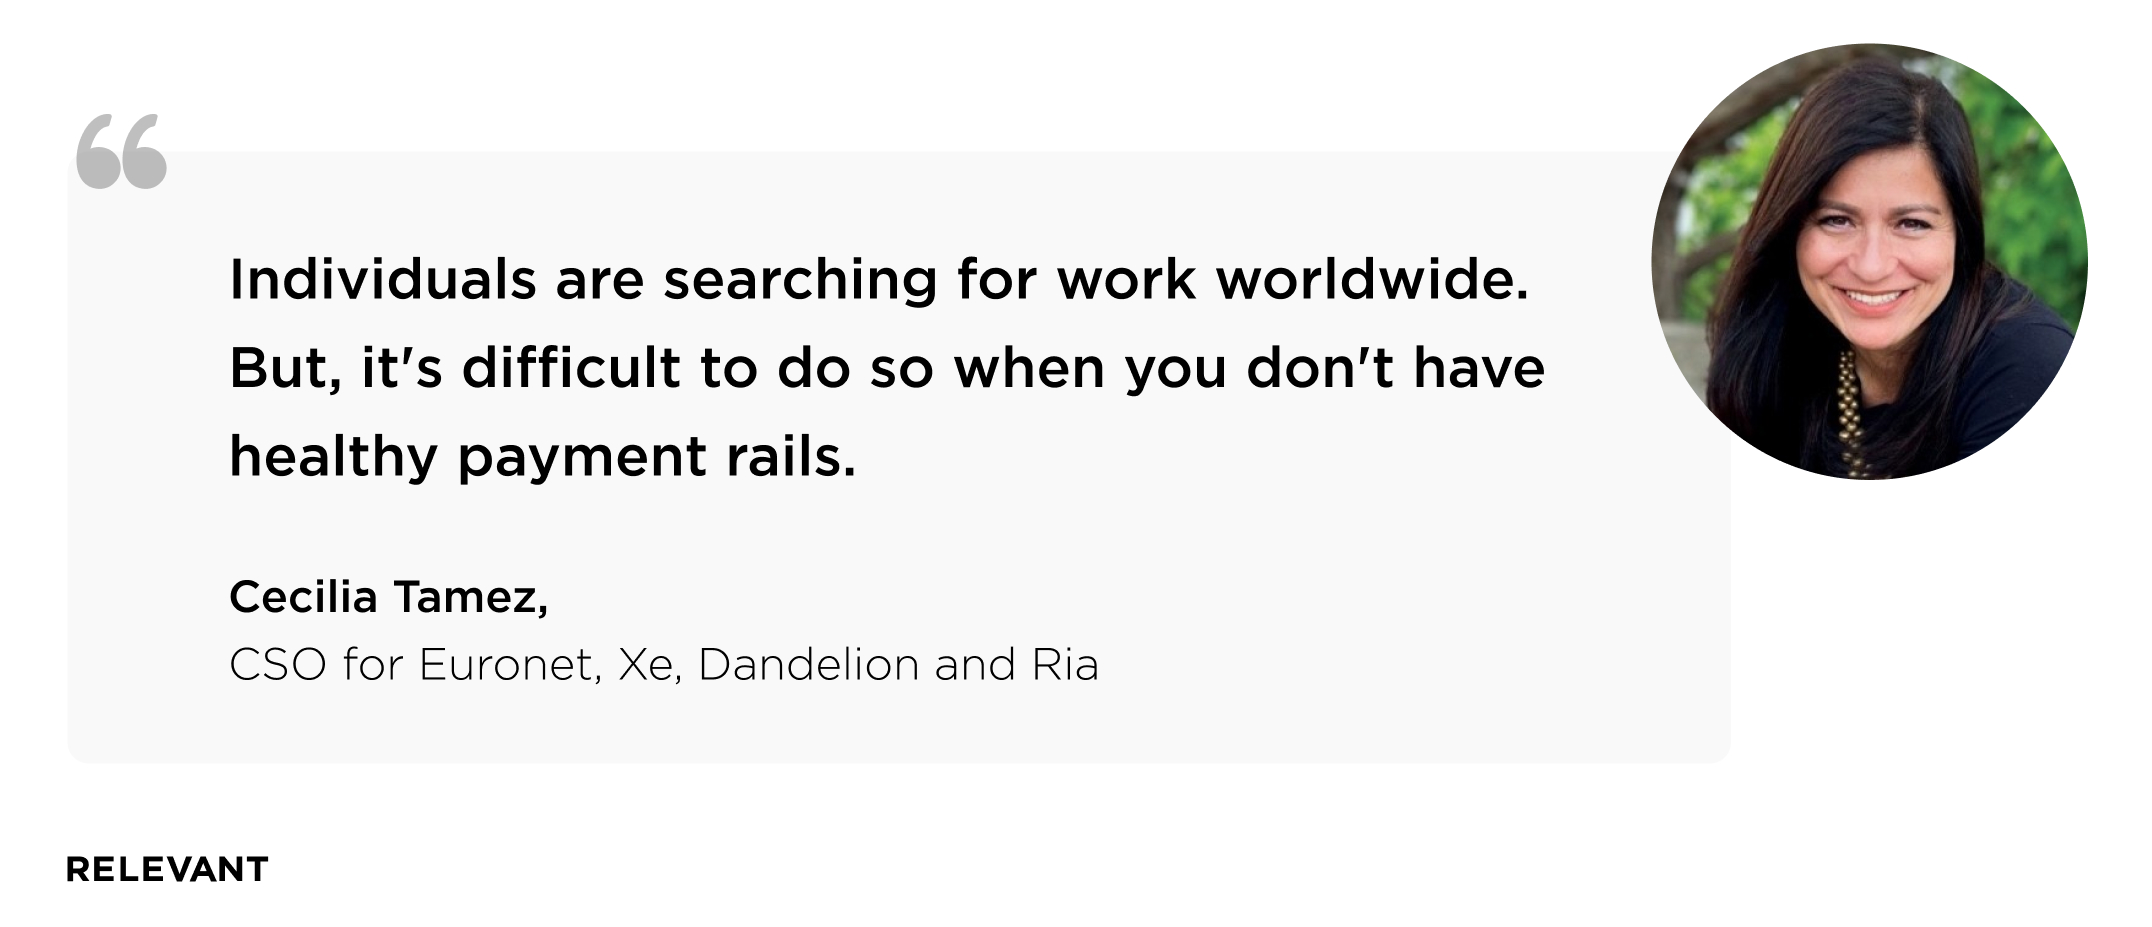 individuals are searching for work worldwide. But, it's difficult to do so when you don't have healthy payment rails